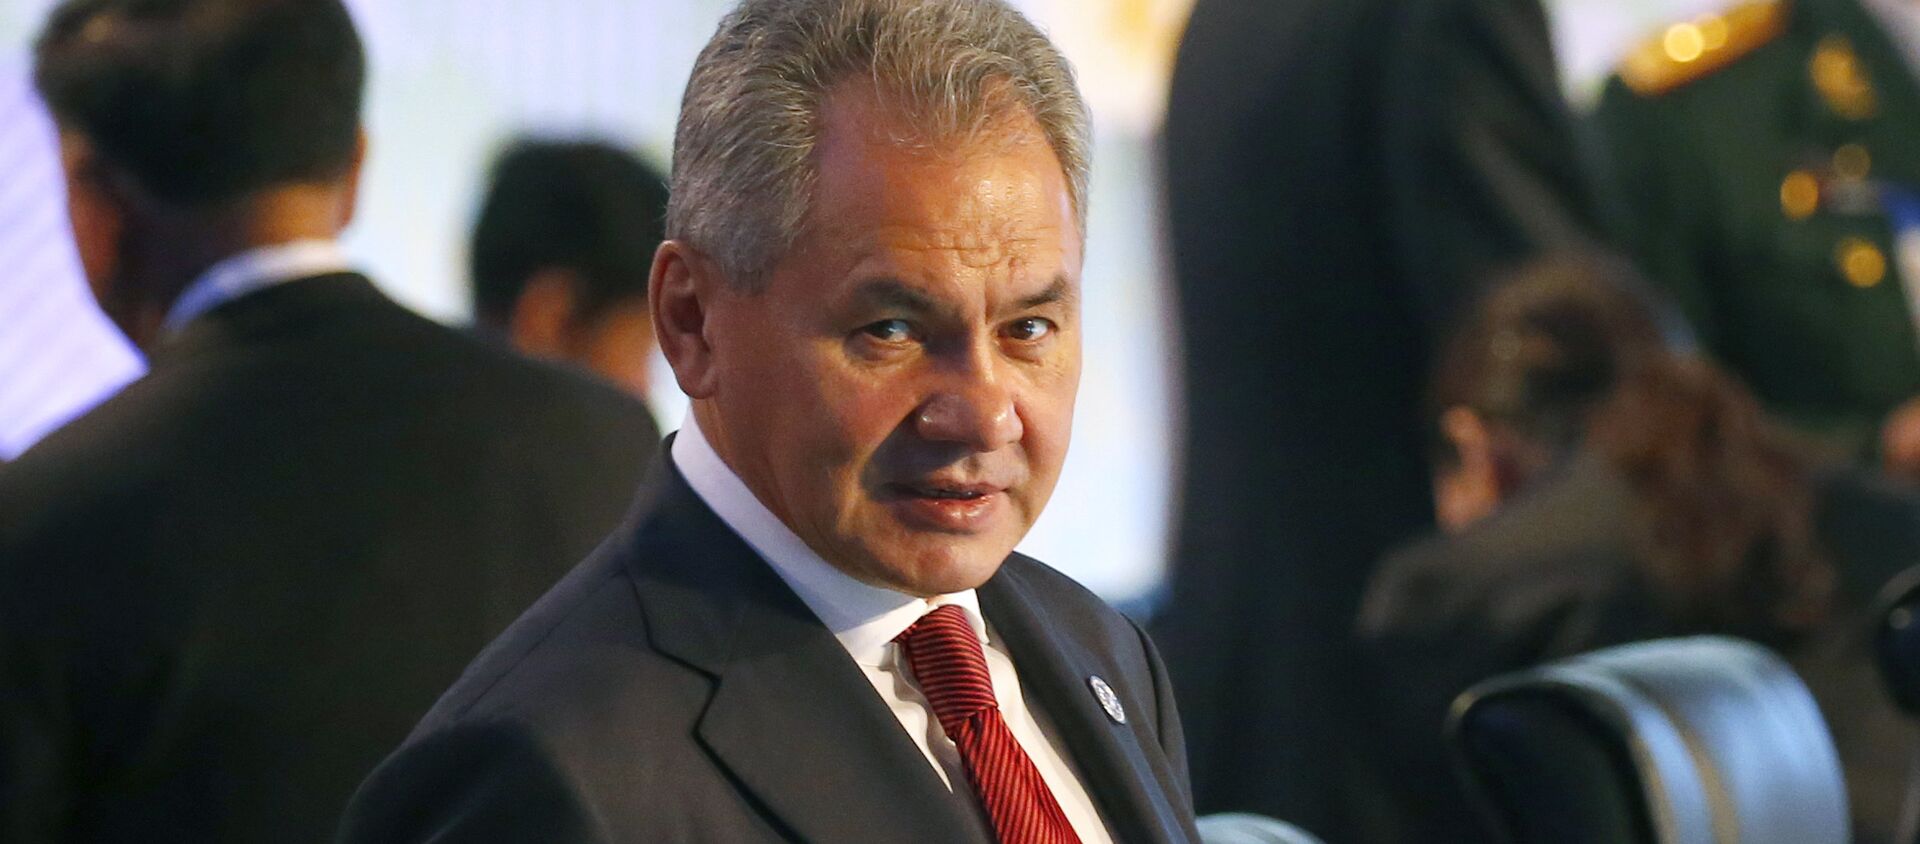 Russian Defense Minister Gen. Sergei Shoigu prepares to take his seat for the two-day ASEAN Defense Ministers' Meeting and its Dialogue Partners Tuesday, Oct. 24, 2017 at Clark, Pampanga province, north of Manila, Philippine - Sputnik International, 1920, 24.07.2018